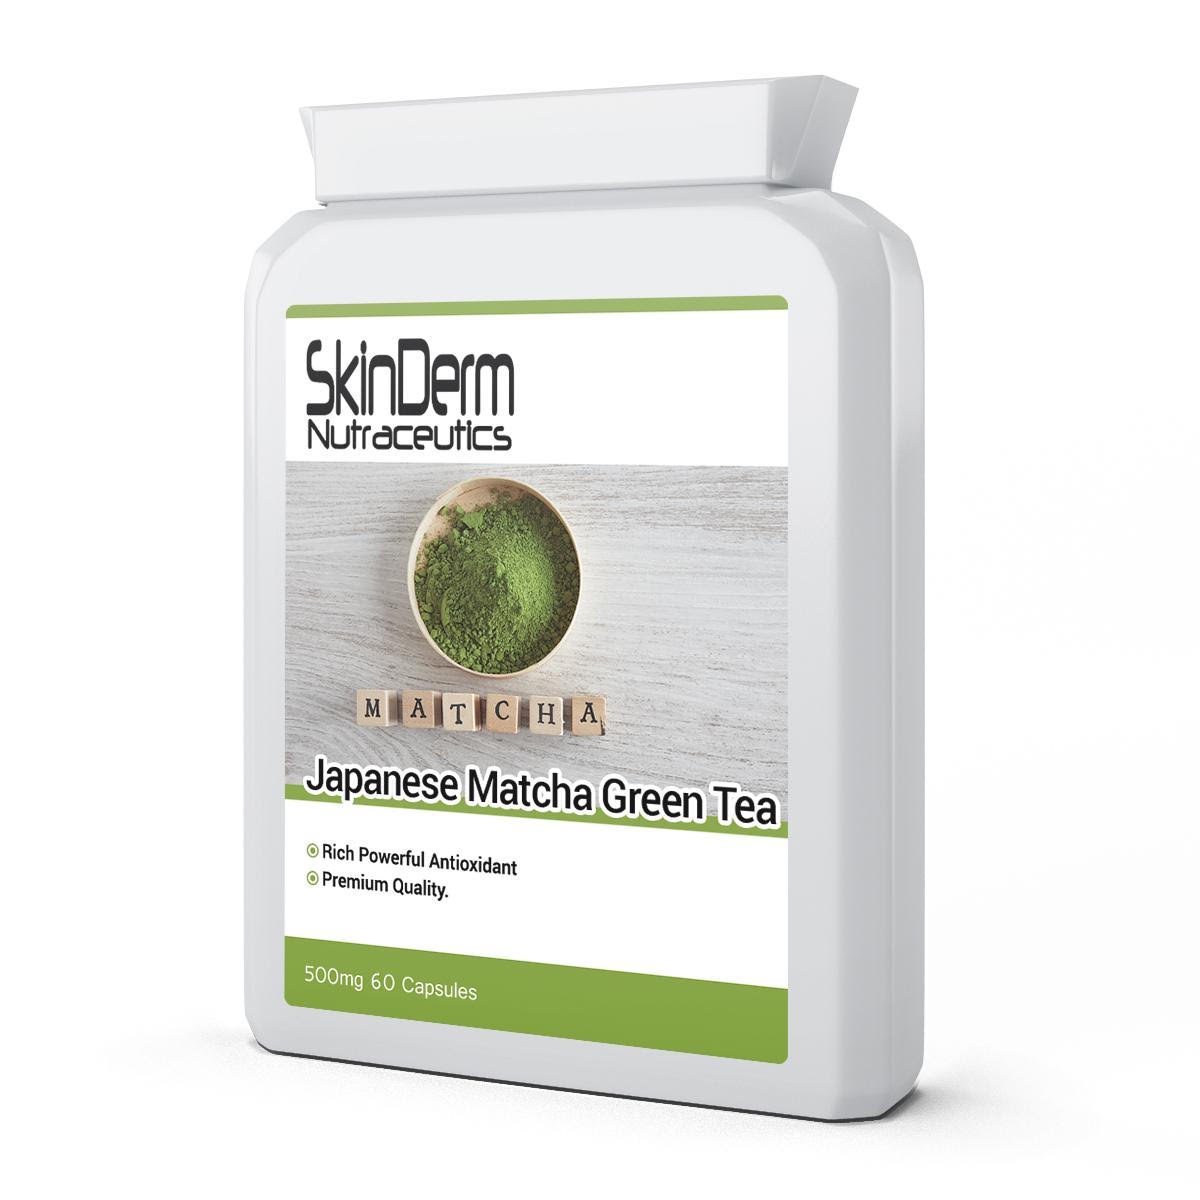 #SkinDerm #Nutraceutics #Japanese #Matcha #GreenTea provides a specially selected and world renowned #nutritionalsource of green #tea in a daily vegetarian friendly #capsule. Get from our website skinderm.co.uk From Amazon.com ...amzn.to/2zP5s0N